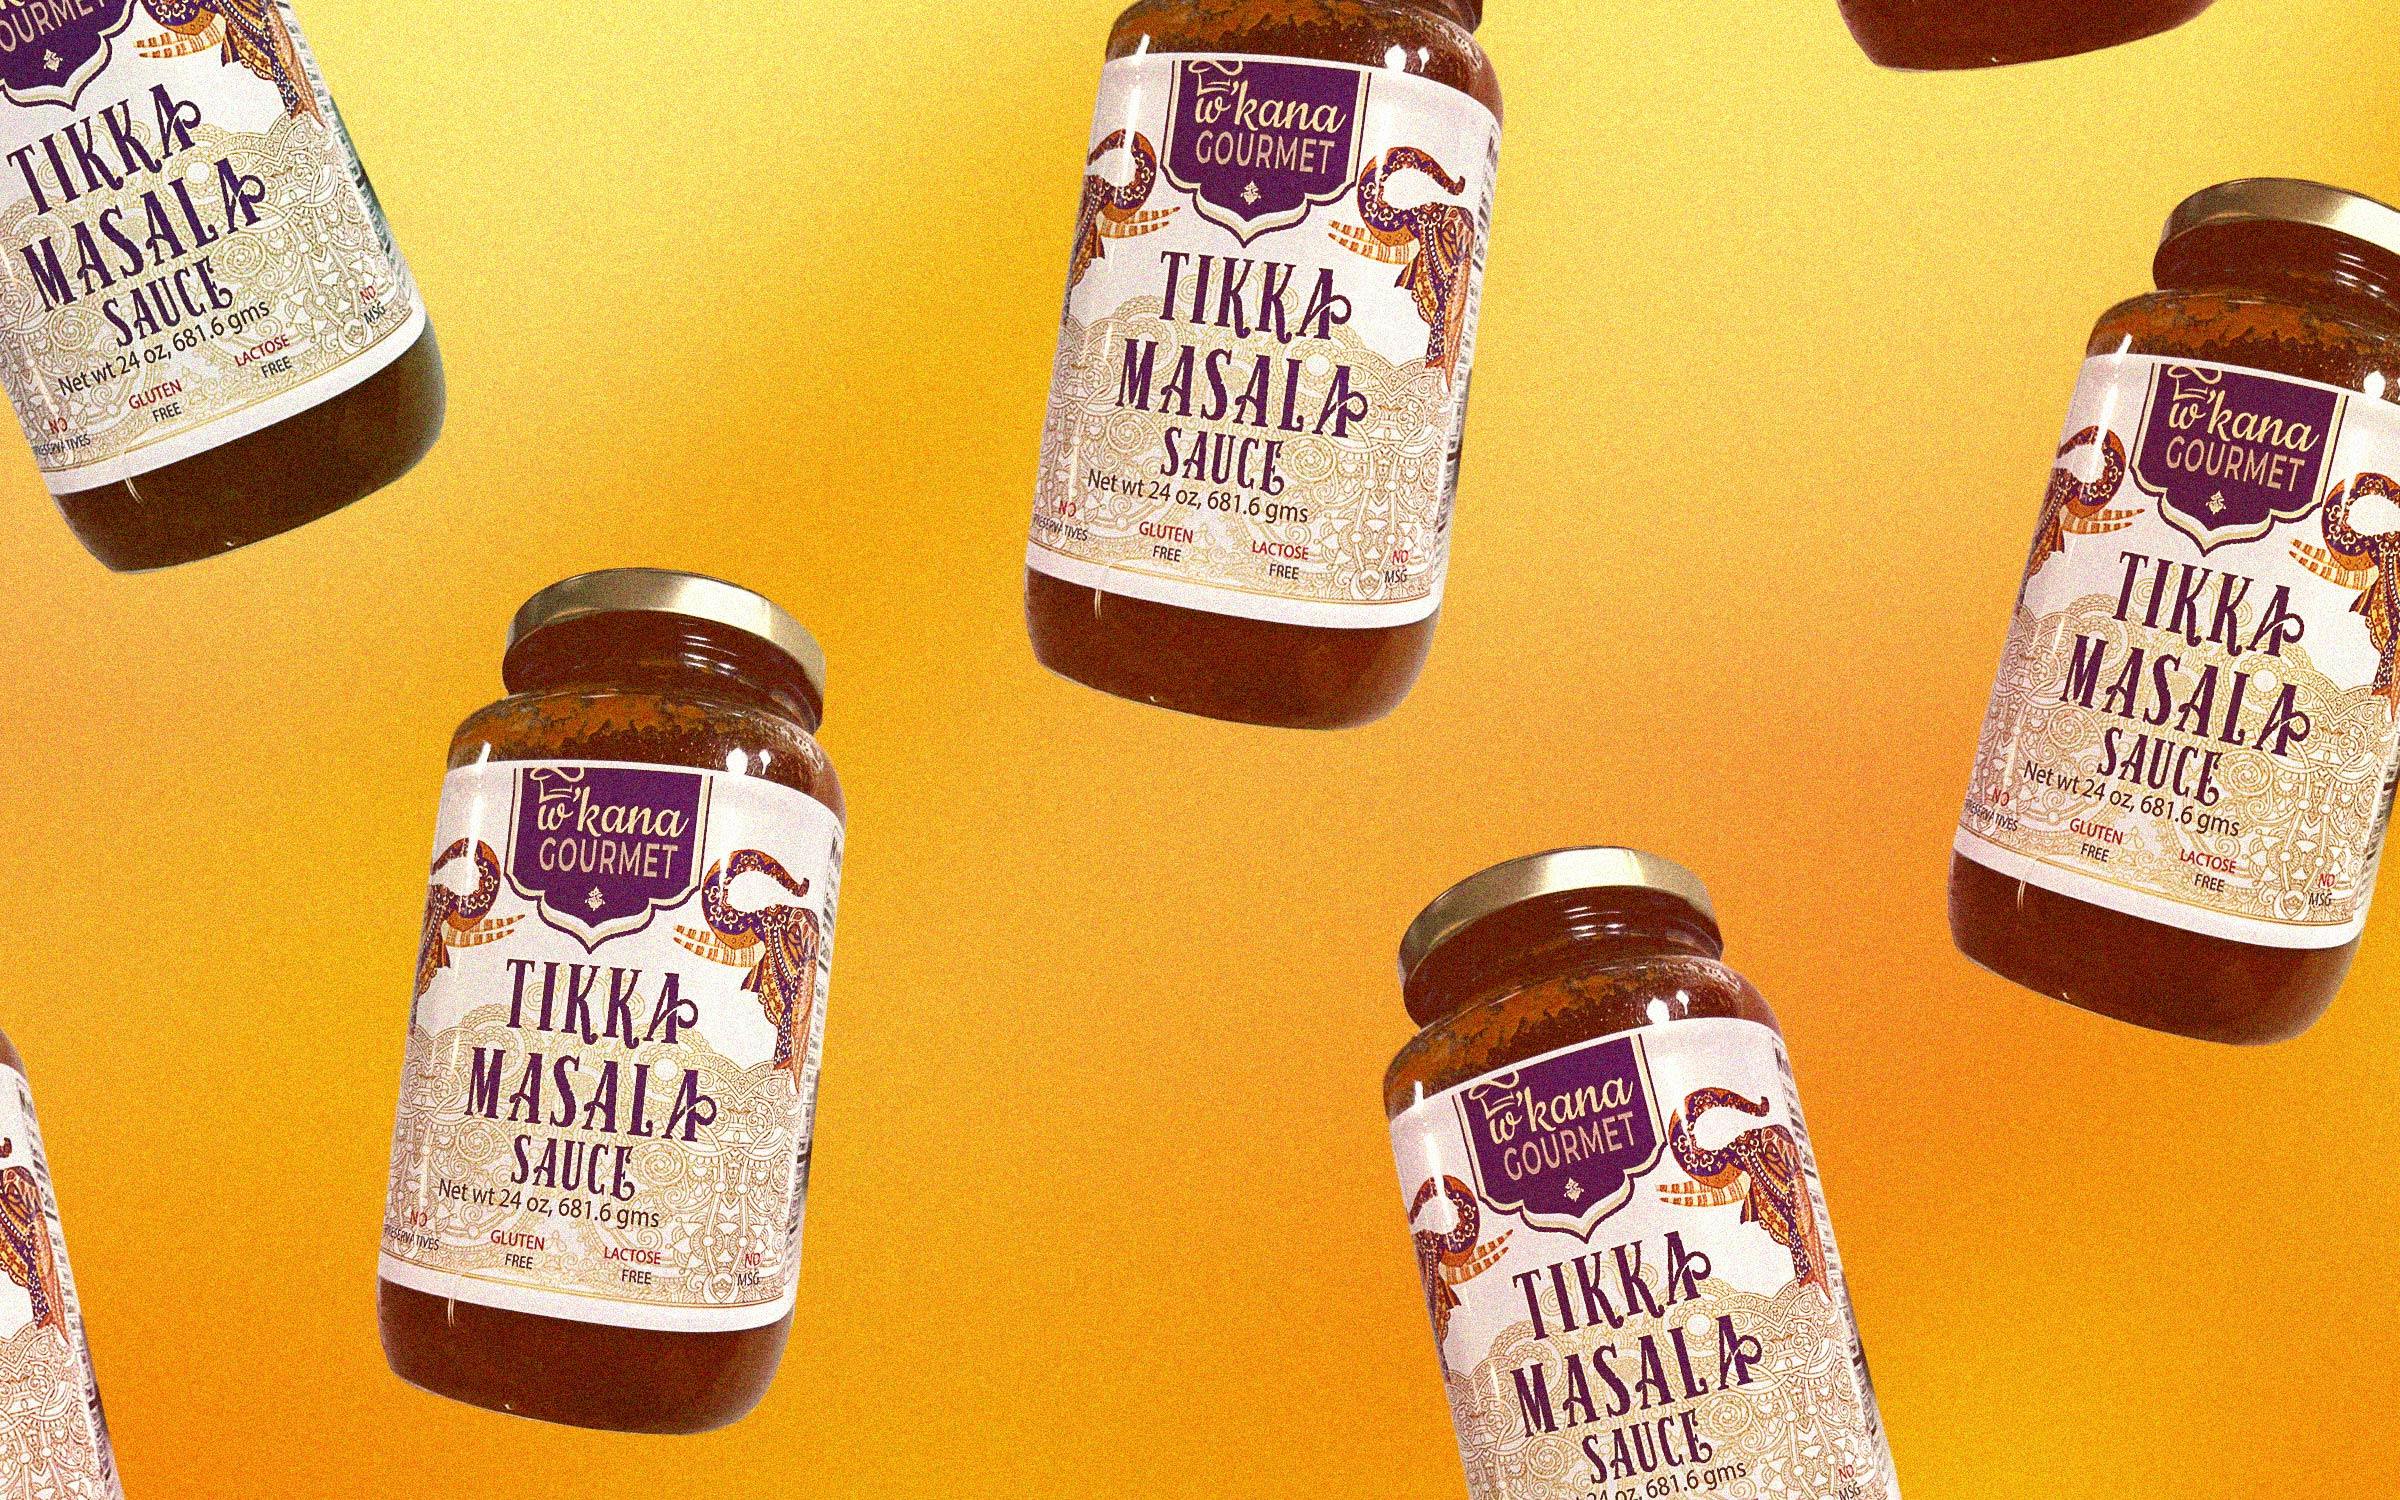 How This Costco Texas Brand Got Into of Indian Sauces